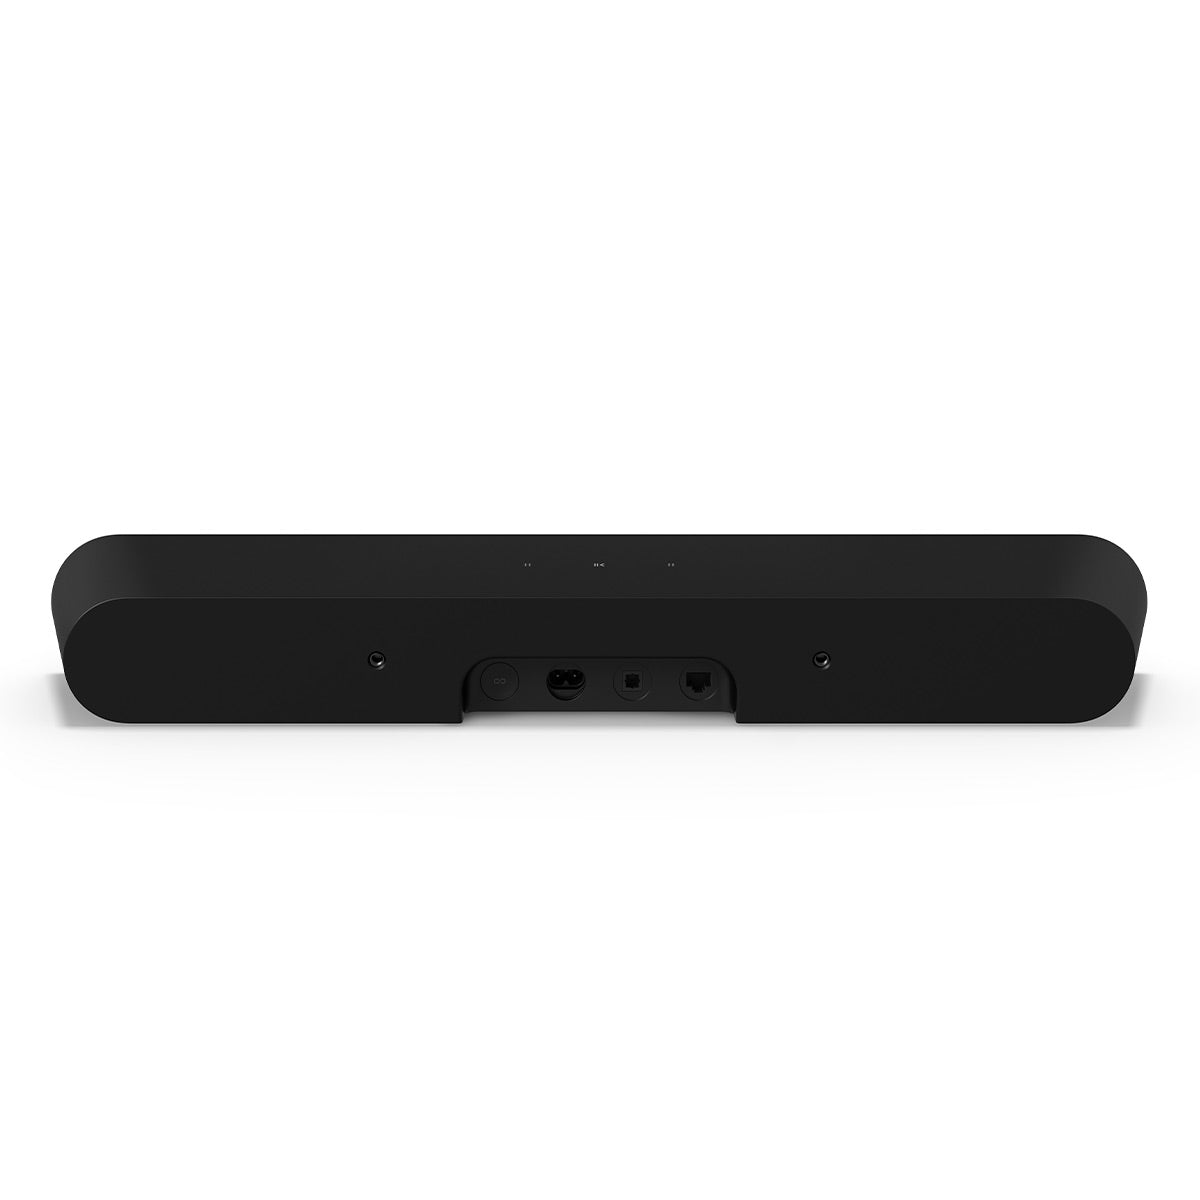 Sonos Ray Compact Sound Bar for TV, Gaming, and Music with Wall Mount (Black)